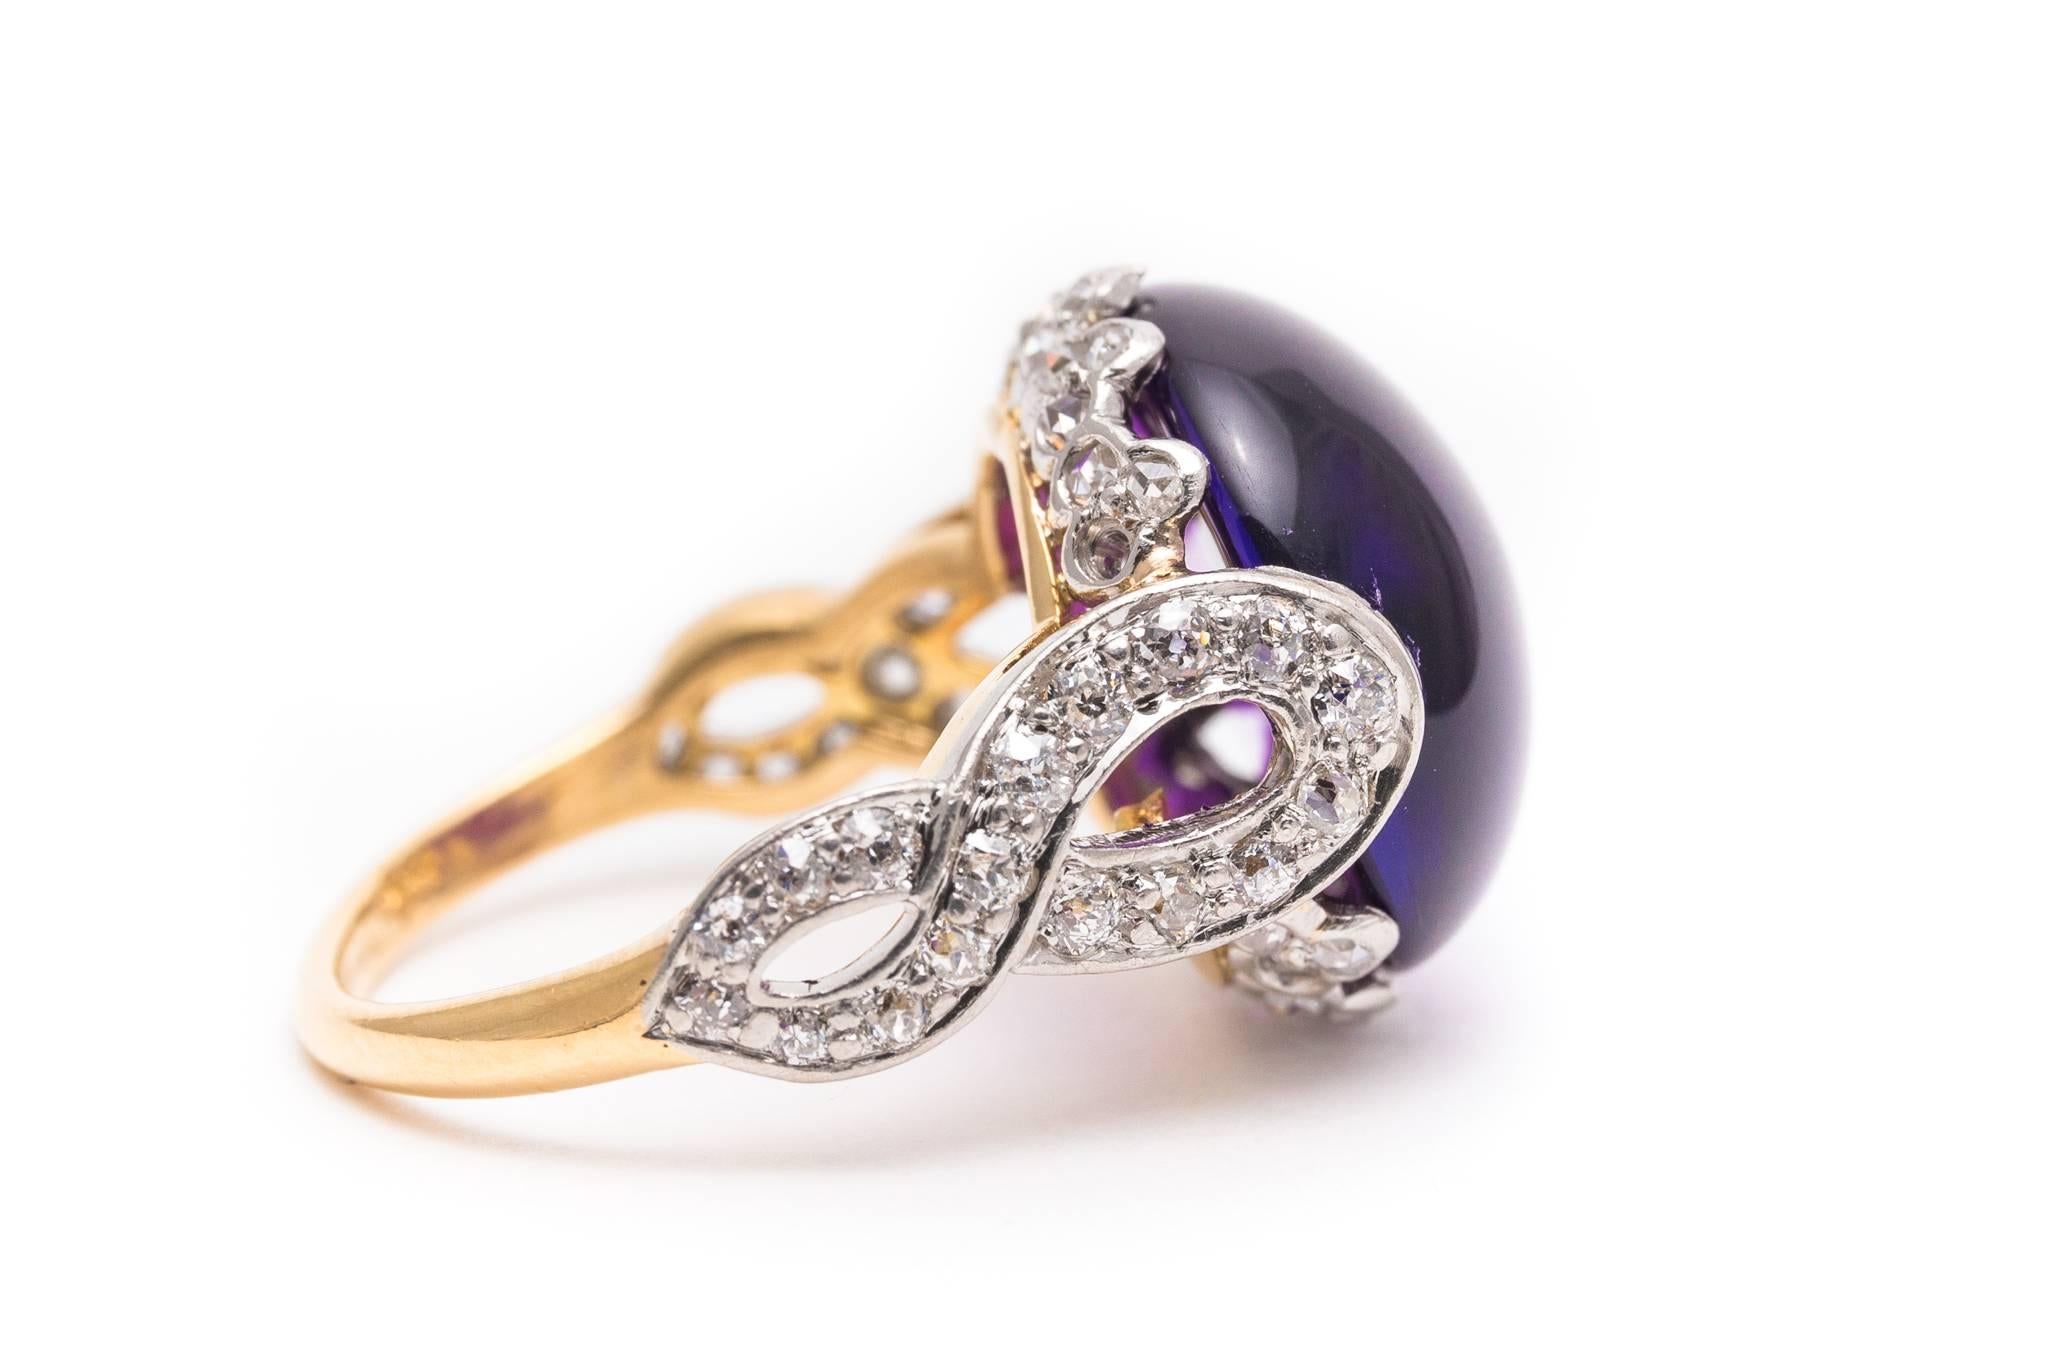 Edwardian Spectacular Amethyst and Diamond Ring in Platinum and Yellow Gold